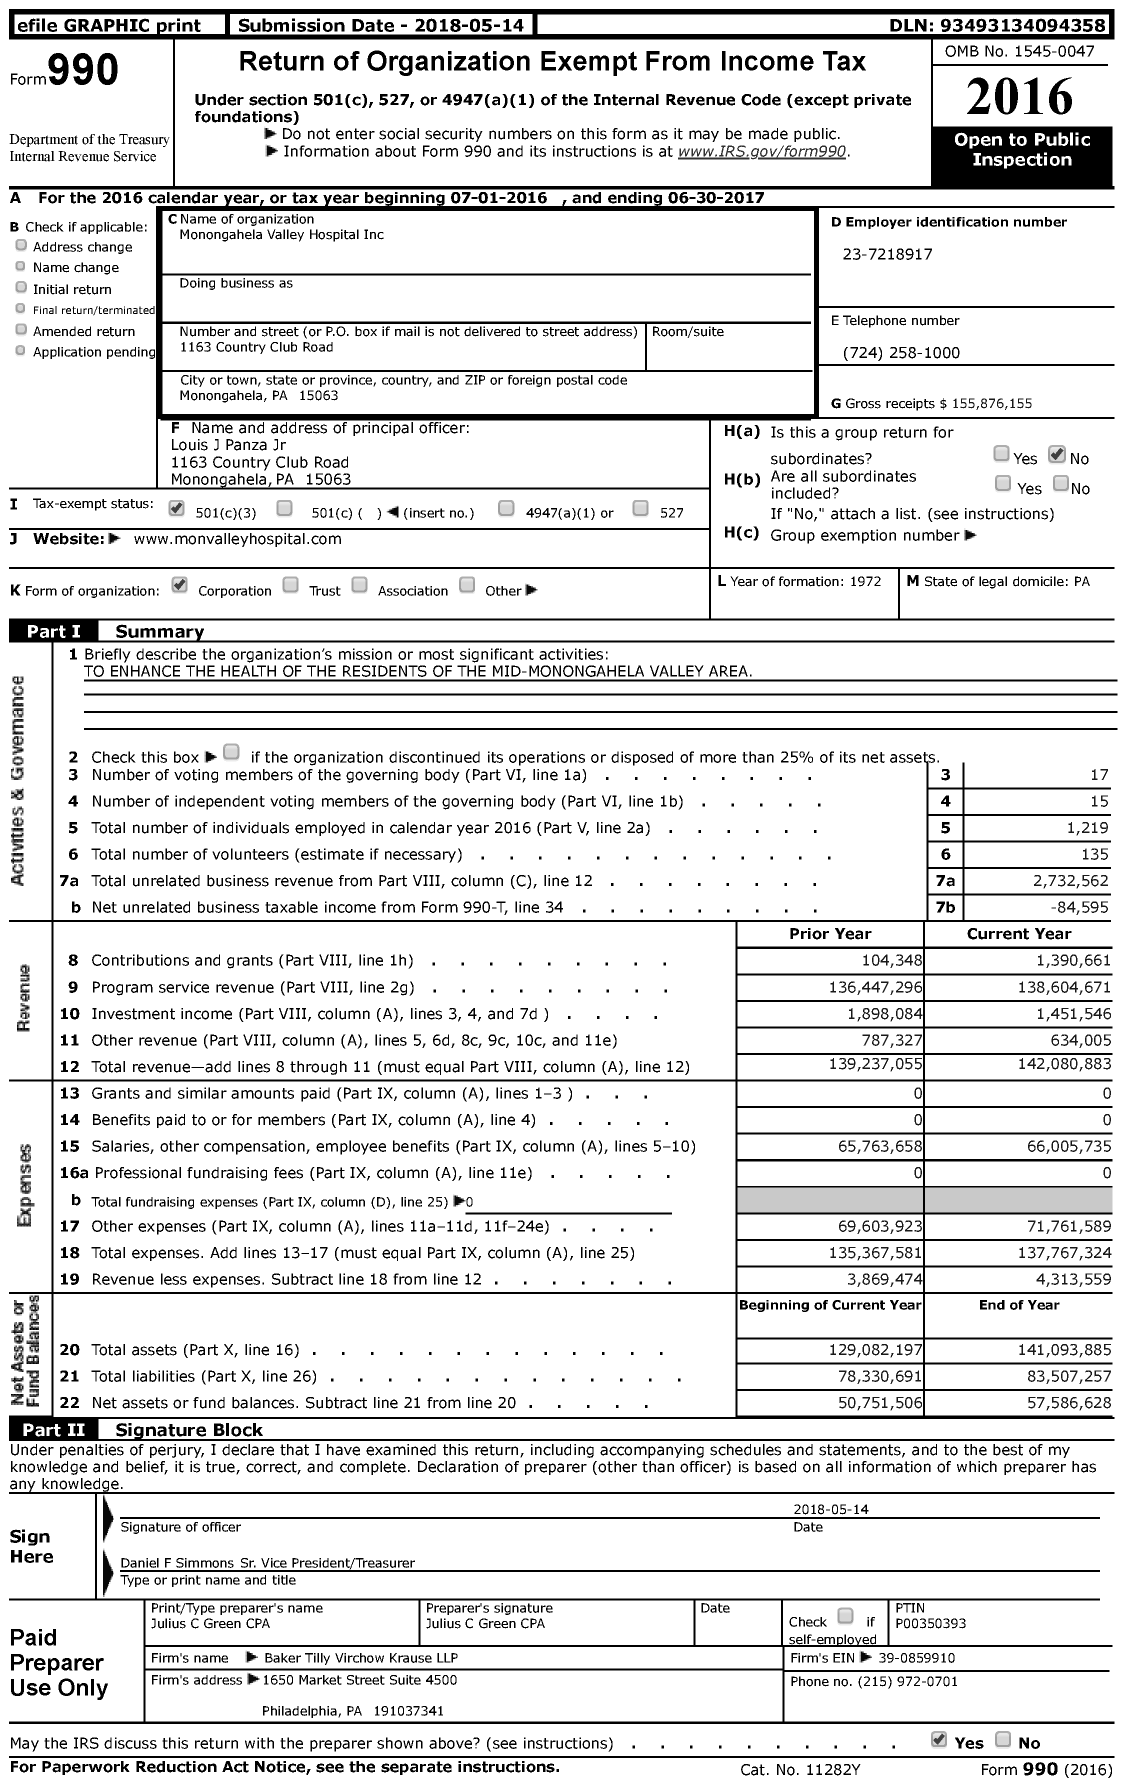 Image of first page of 2016 Form 990 for Monongahela Valley Hospital (MVH)